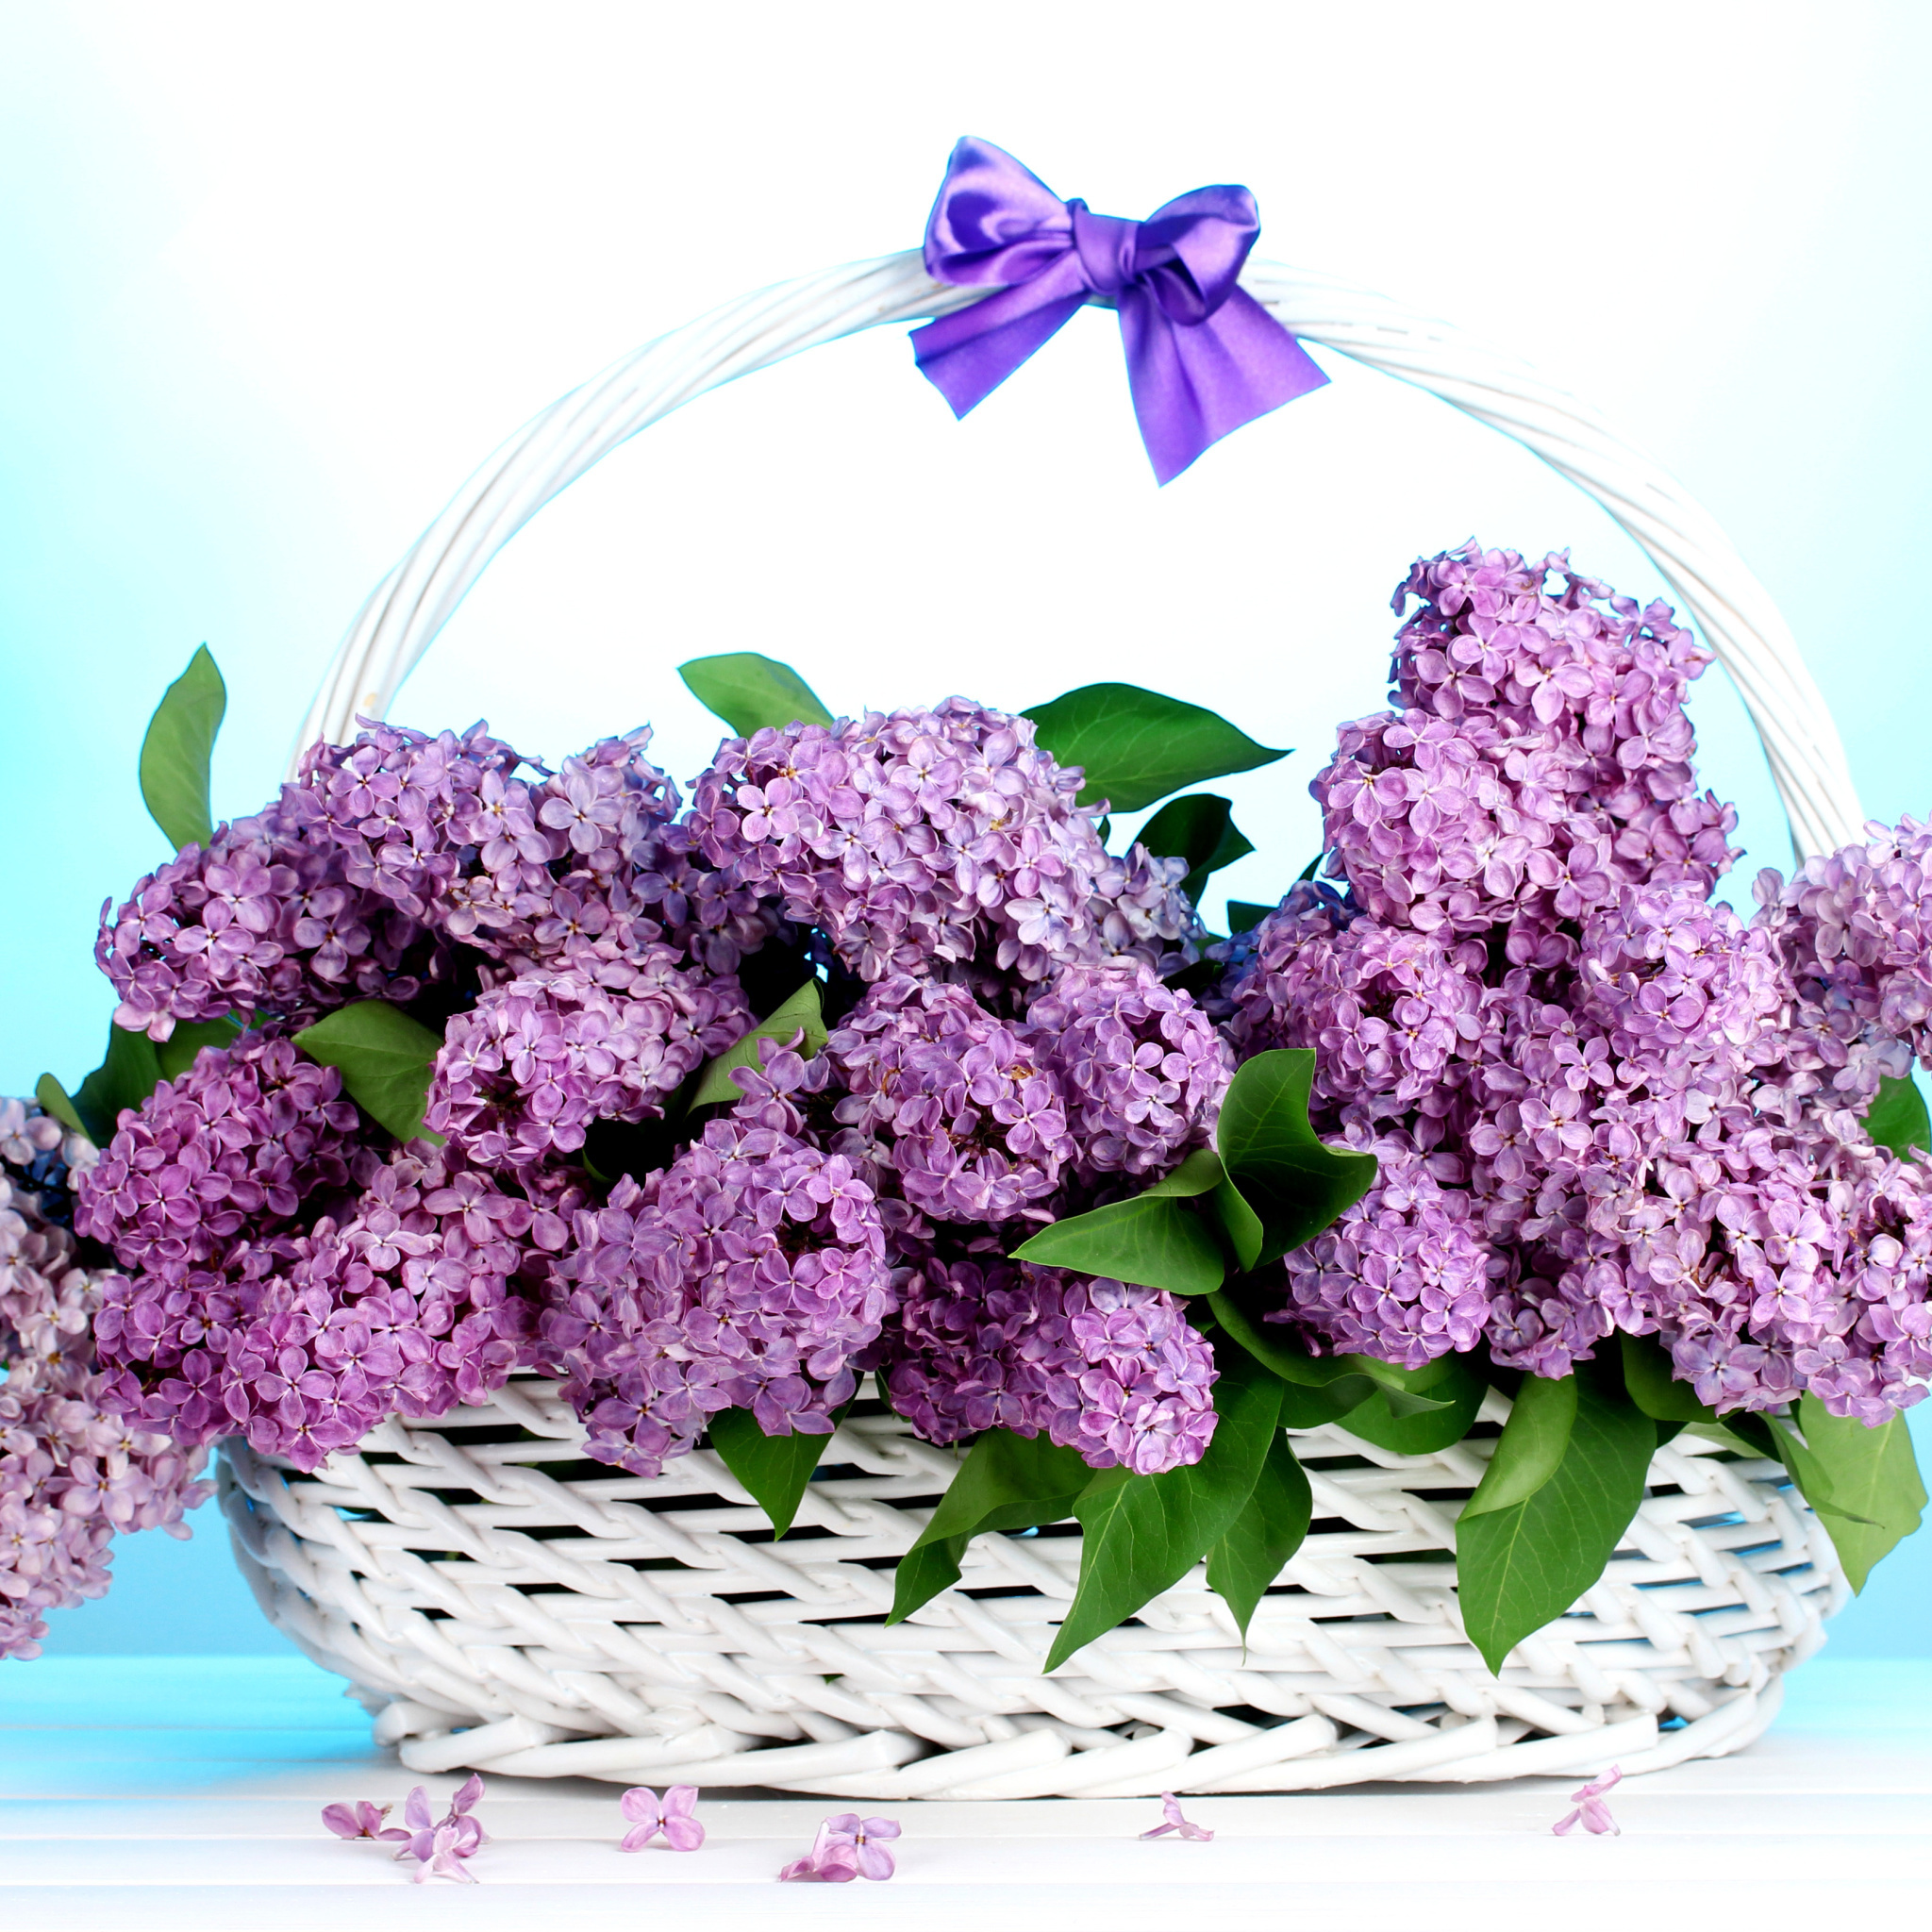 Baskets with lilac flowers wallpaper 2048x2048